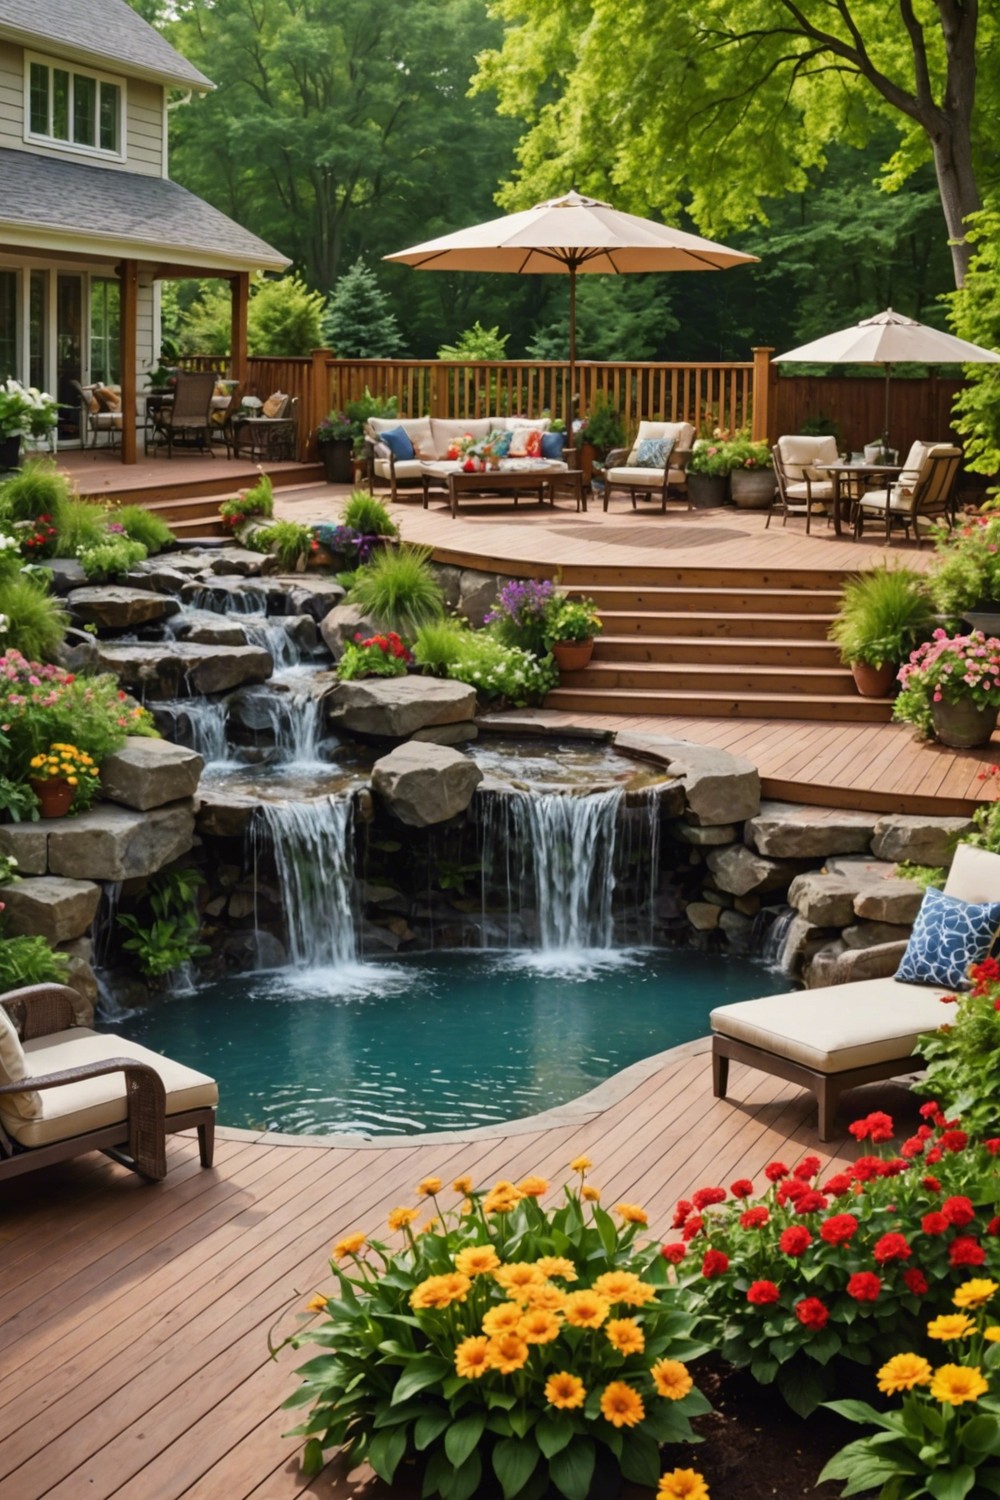 Multi-Level Deck with Waterfall Feature